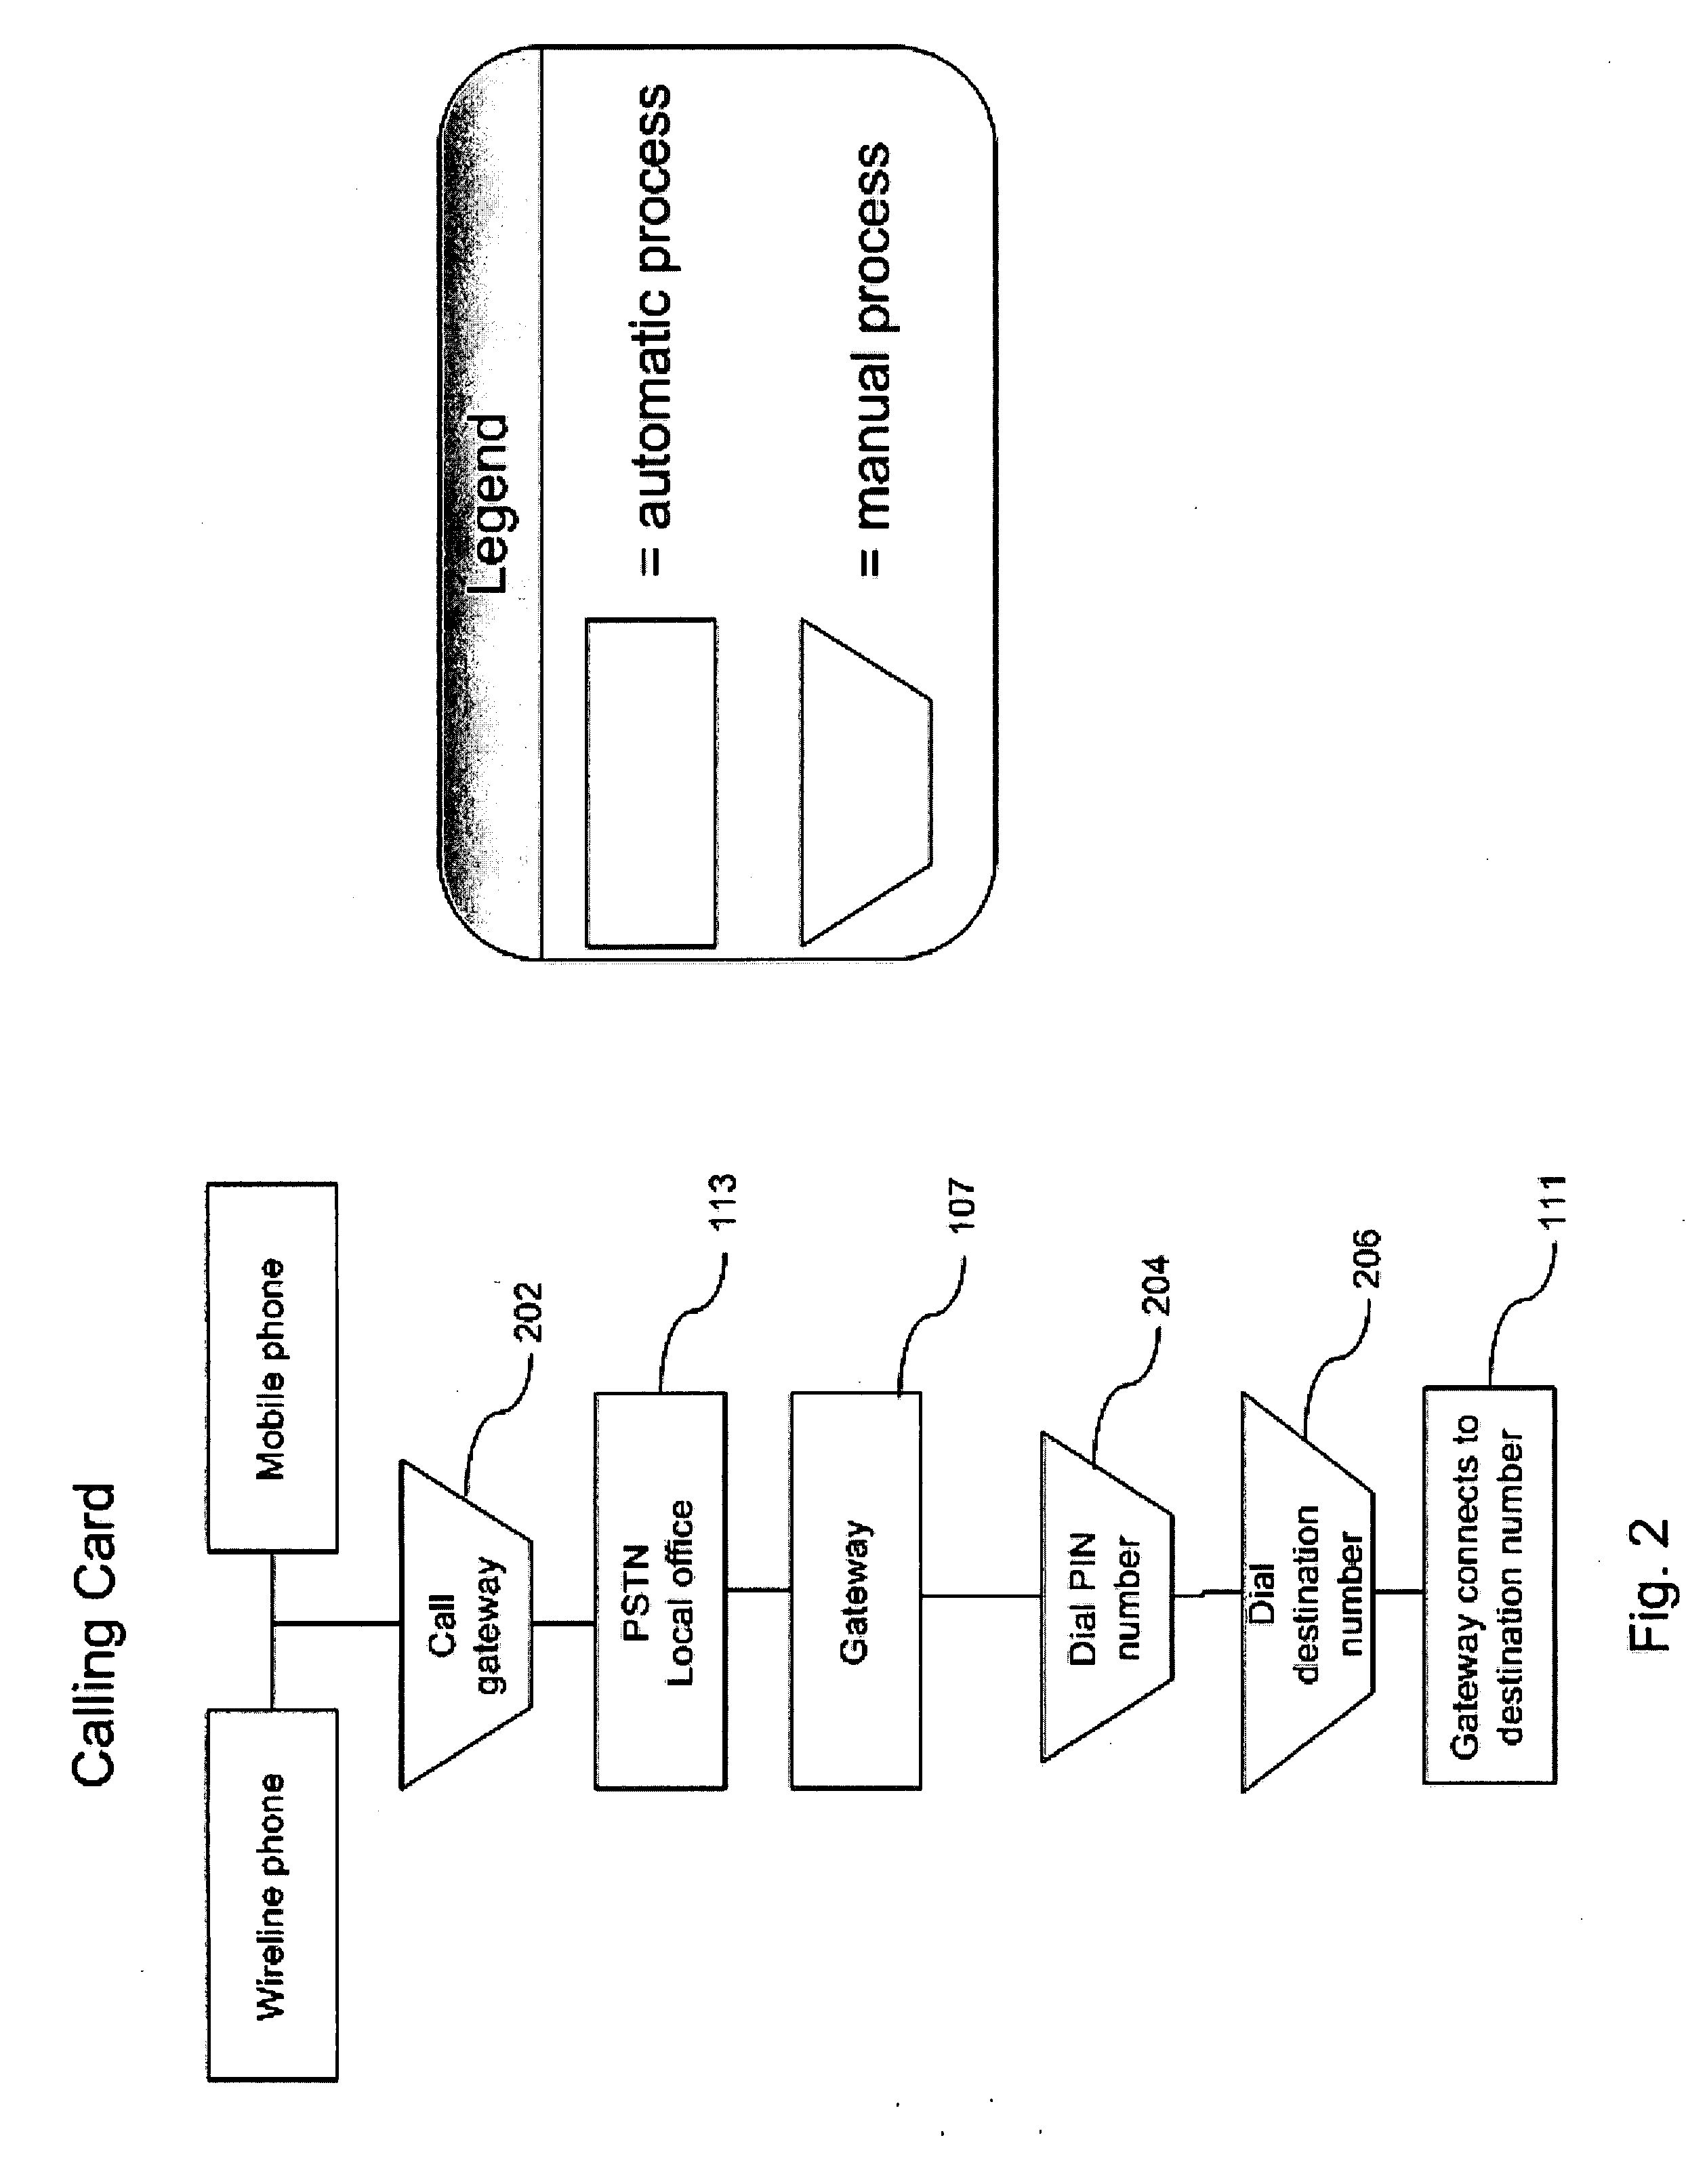 System and process for global dialing using a mobile device